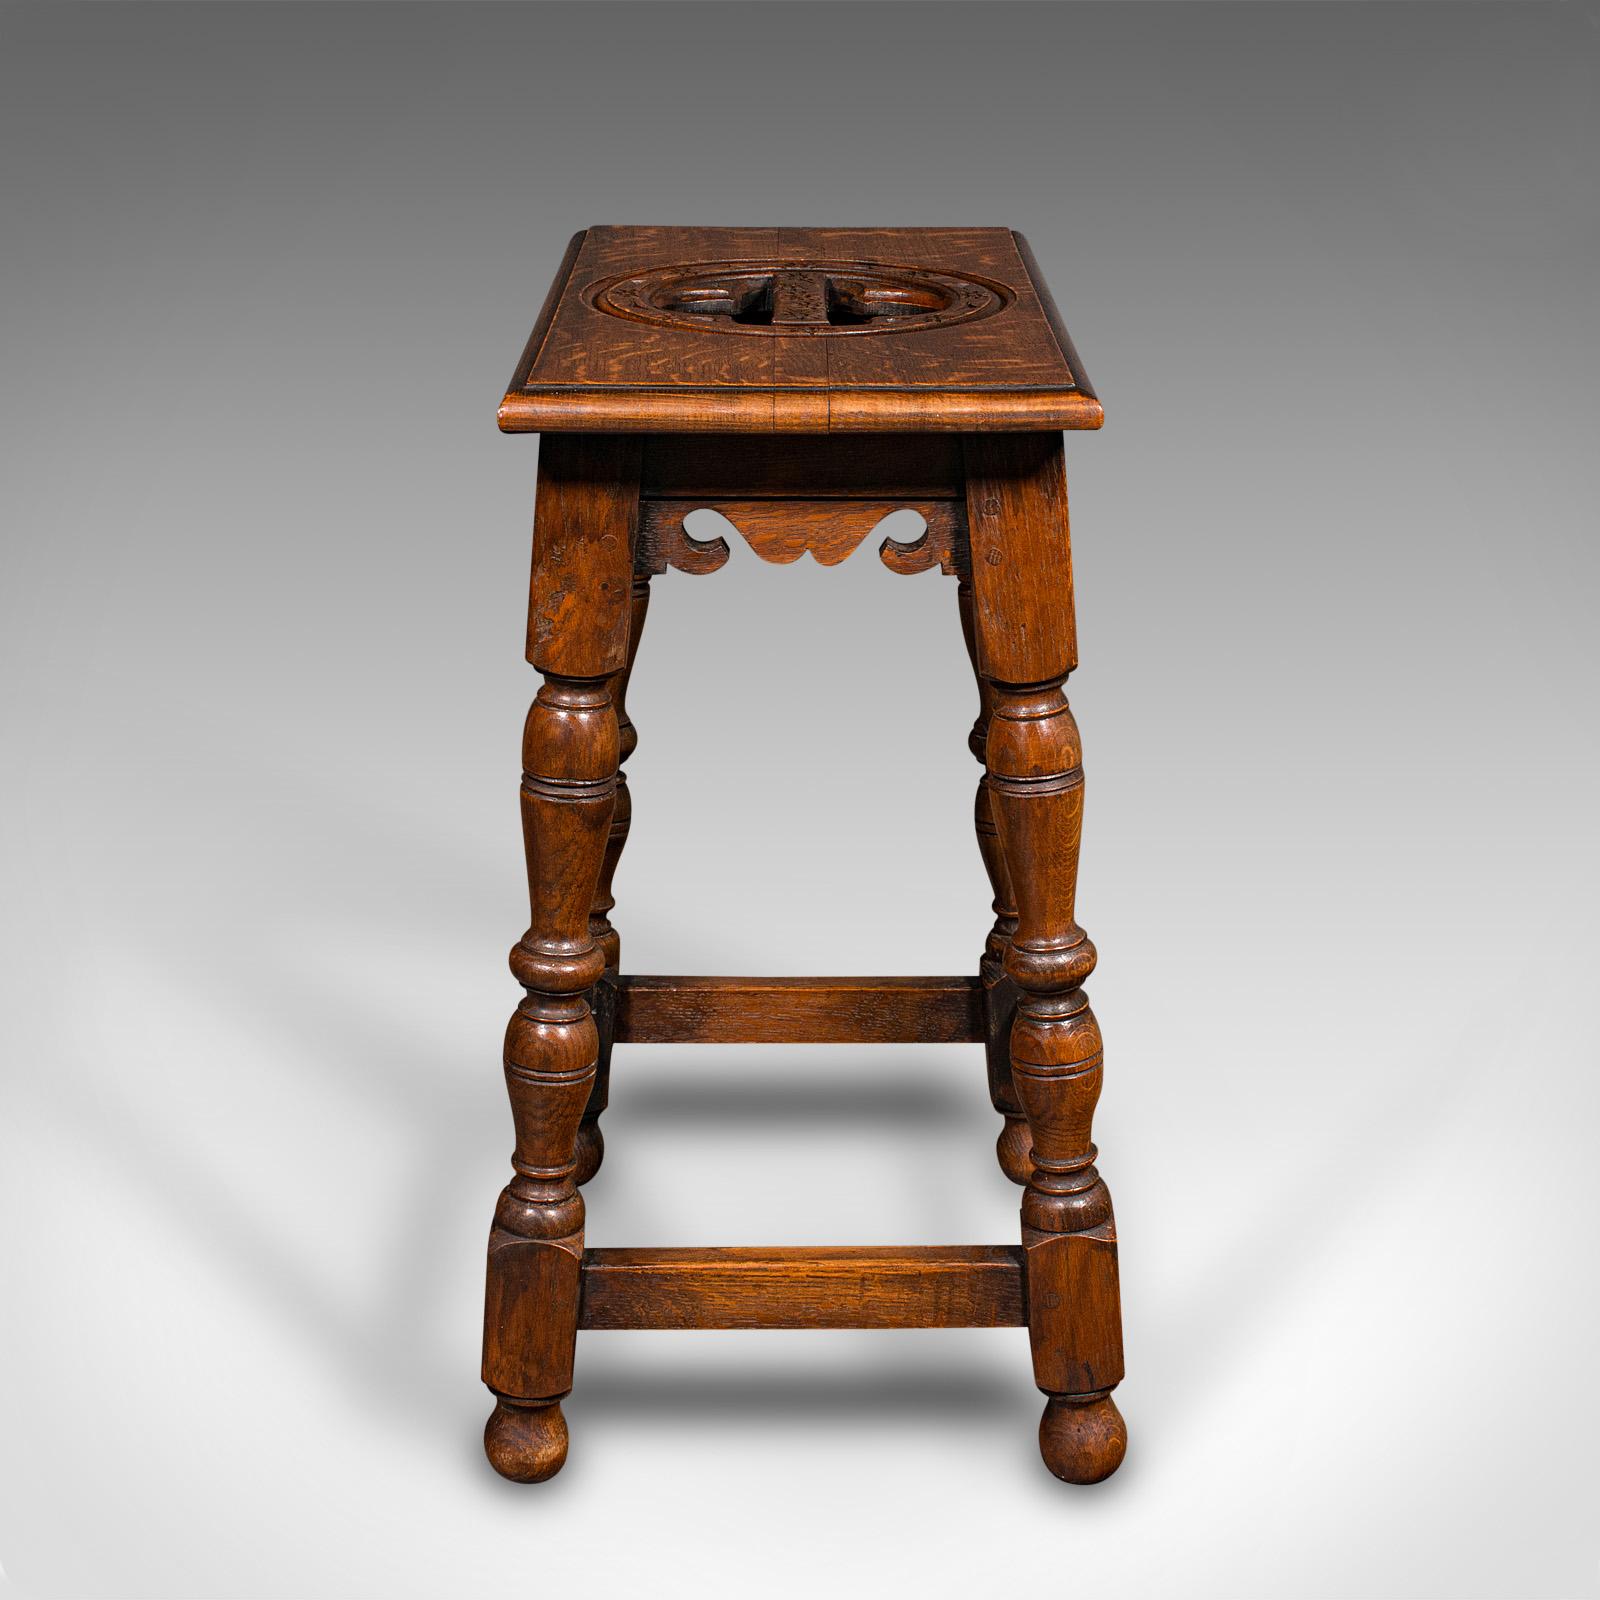 Late Victorian Antique Verger's Stool, English, Oak, Ecclesiastical, Hallway, Victorian, C.1900 For Sale